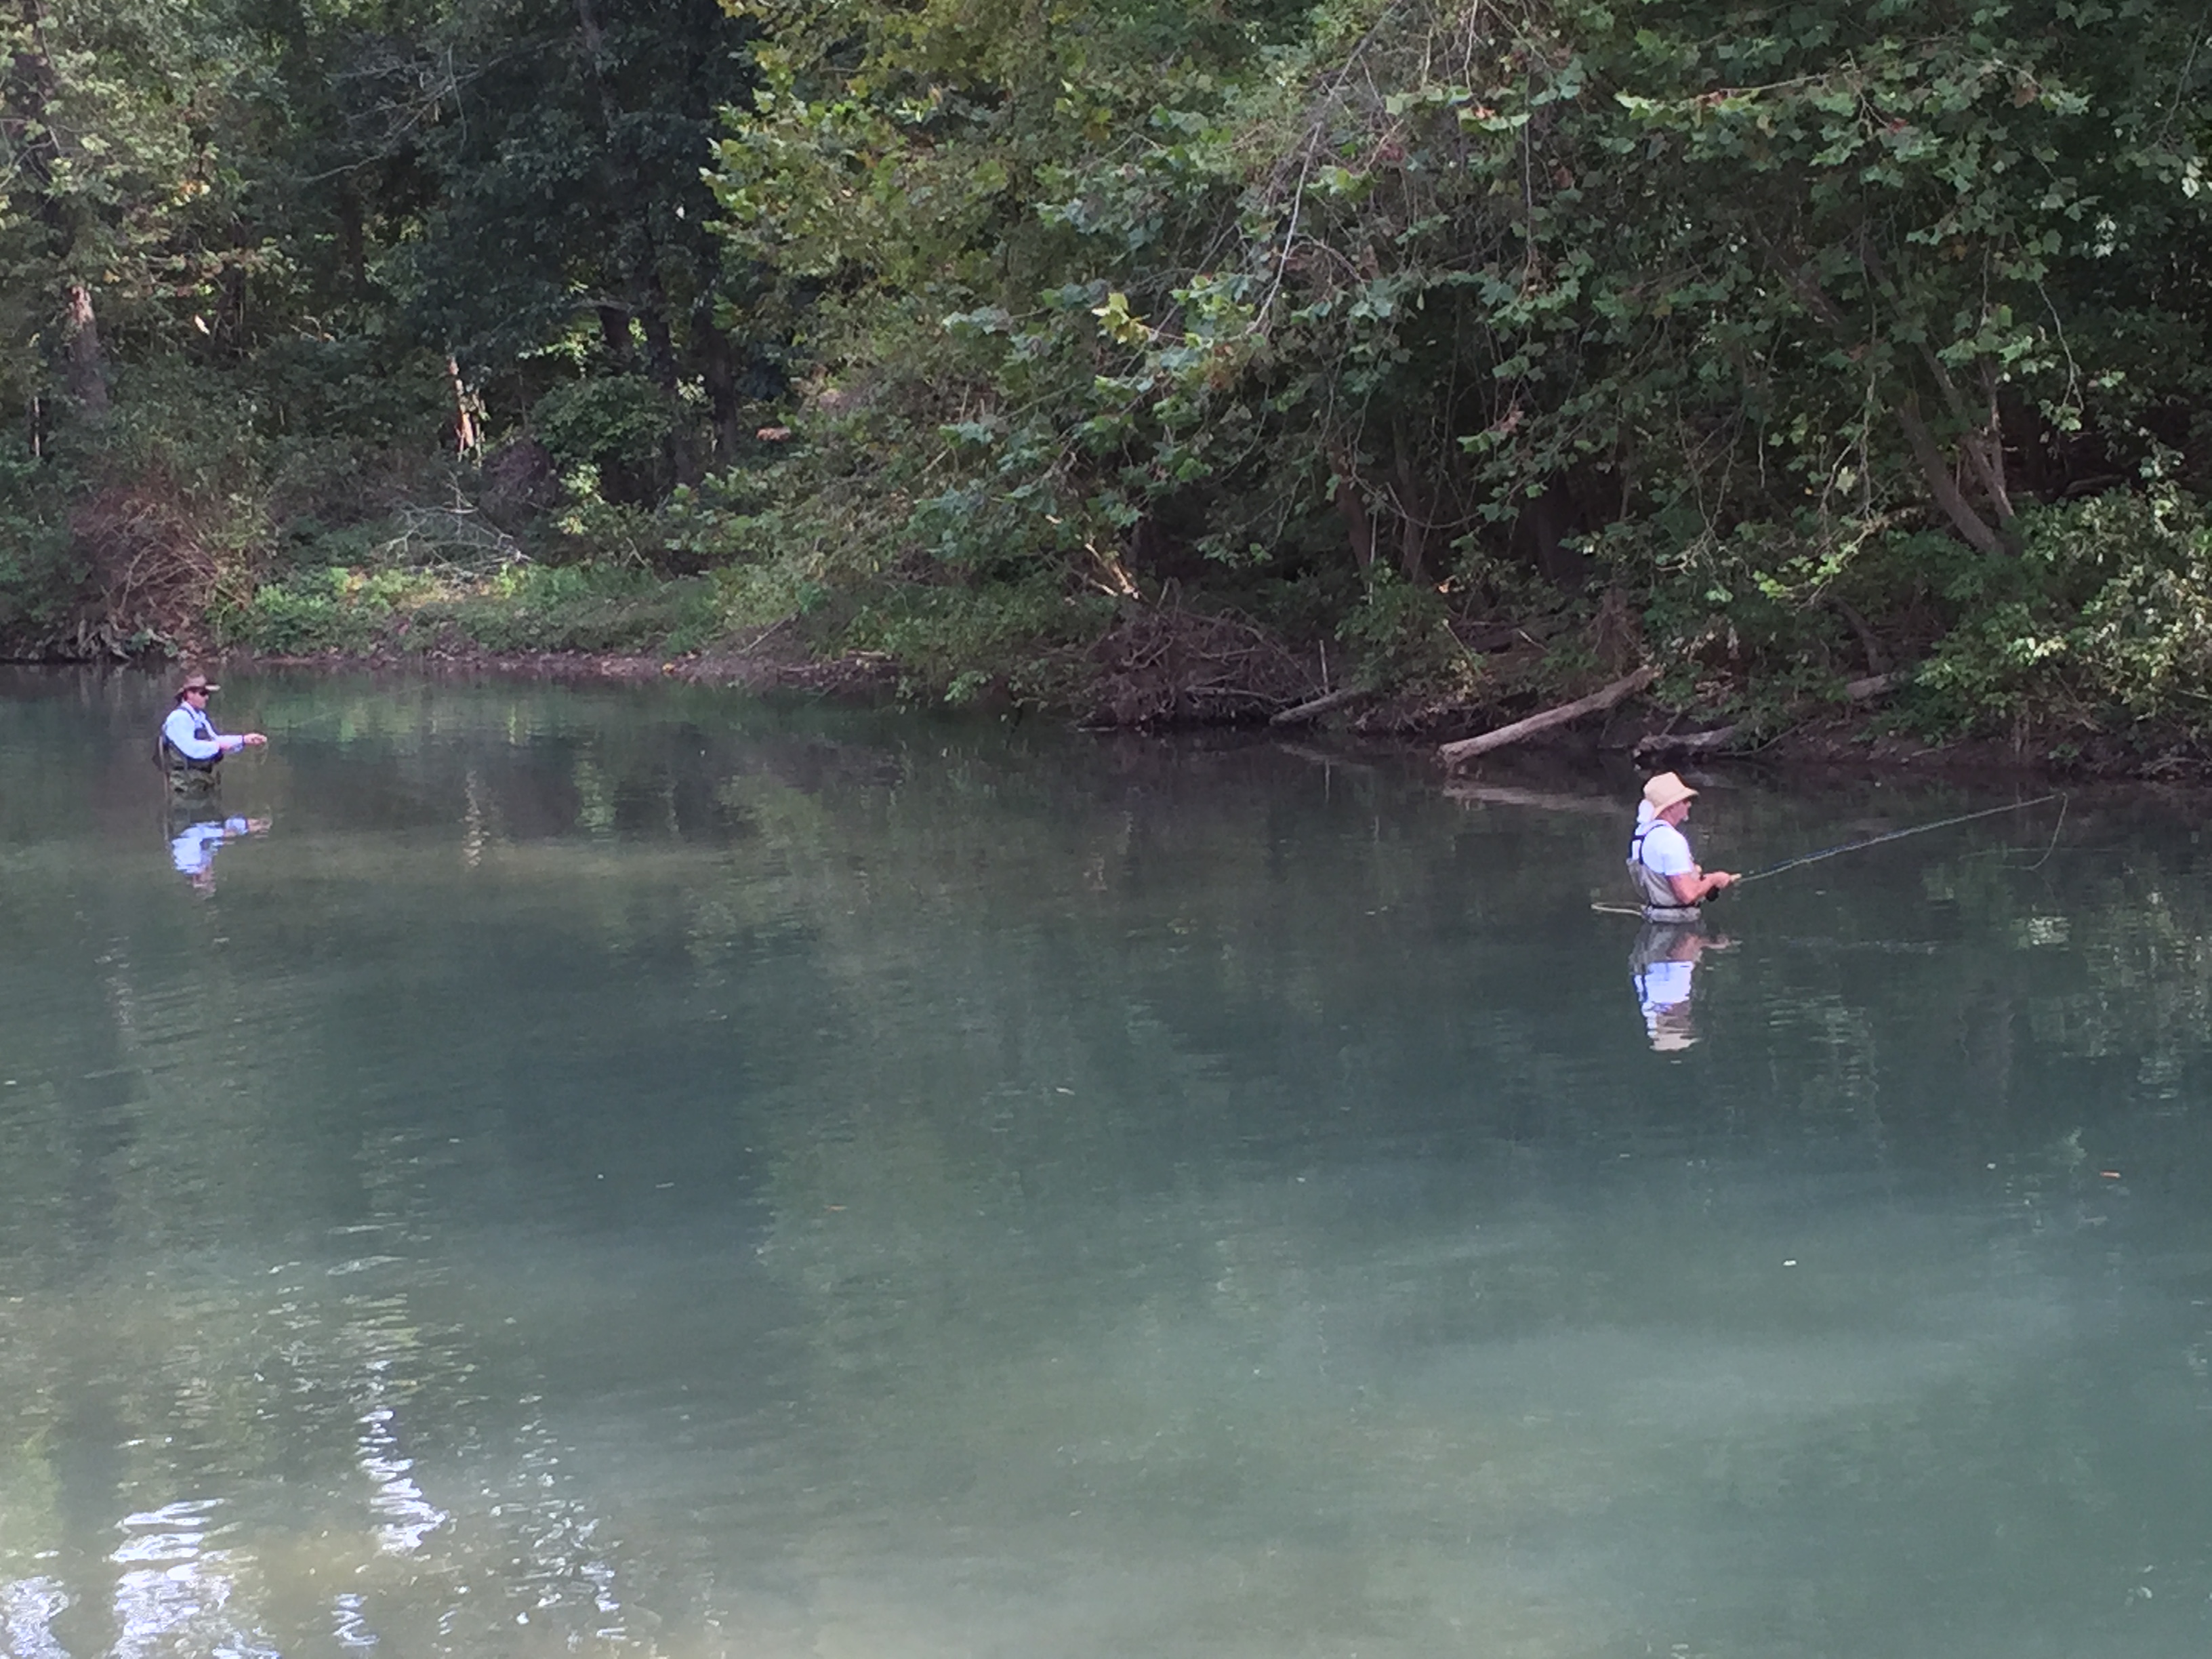 Fishing on the Roaring River in the Ozarks – Missouri